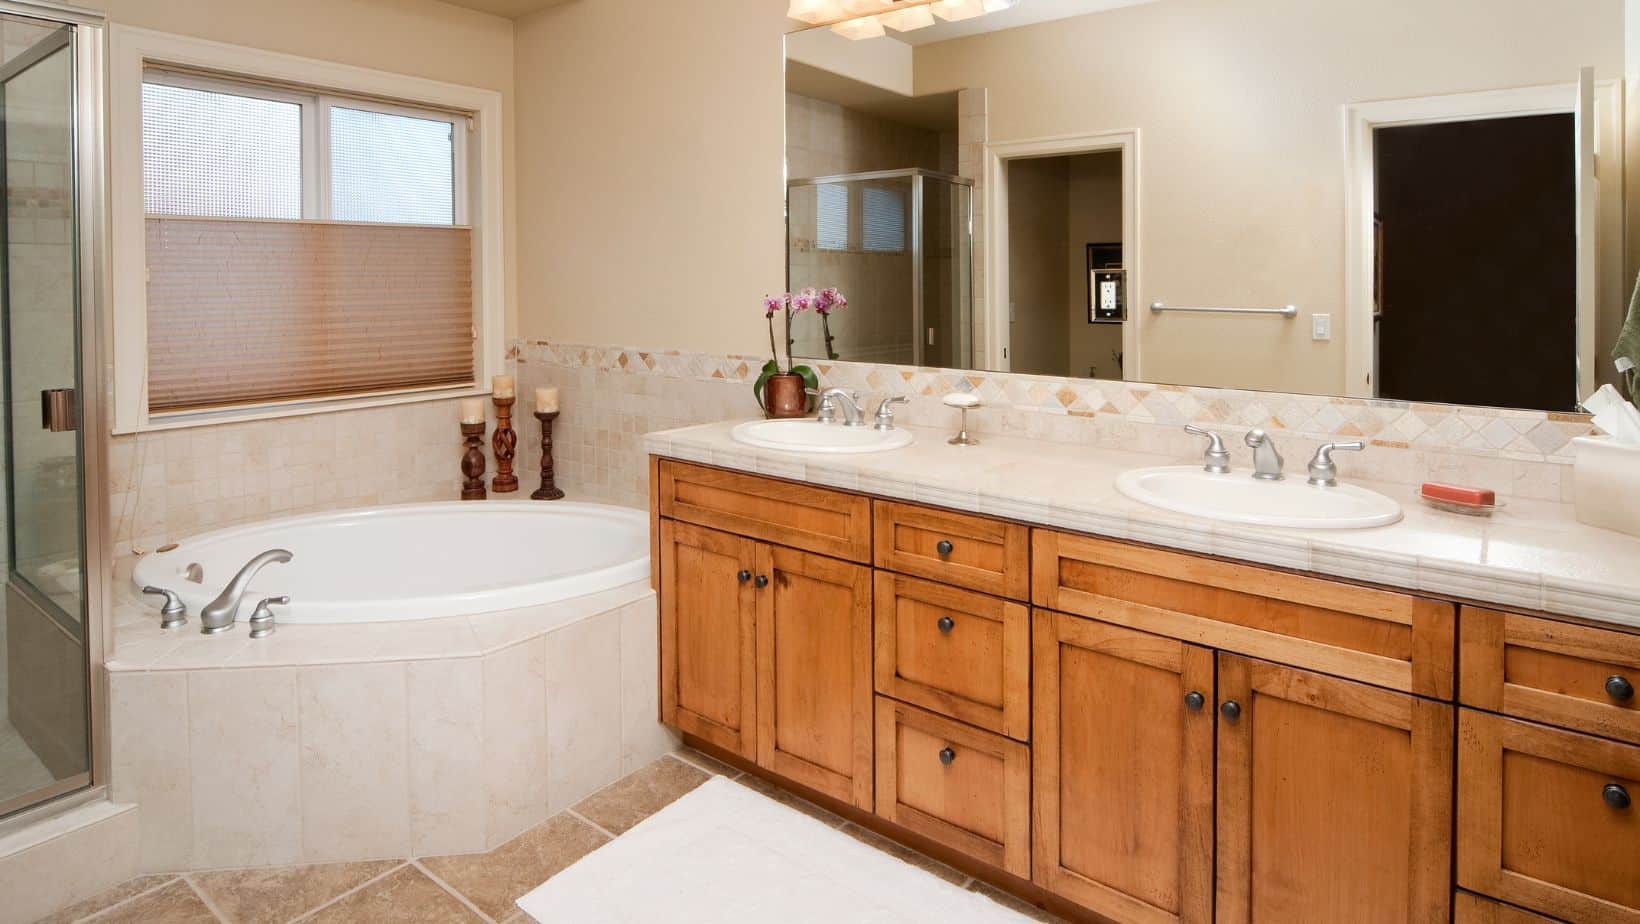 Traditional bathroom style with brown bathroom cabinets and bath tub